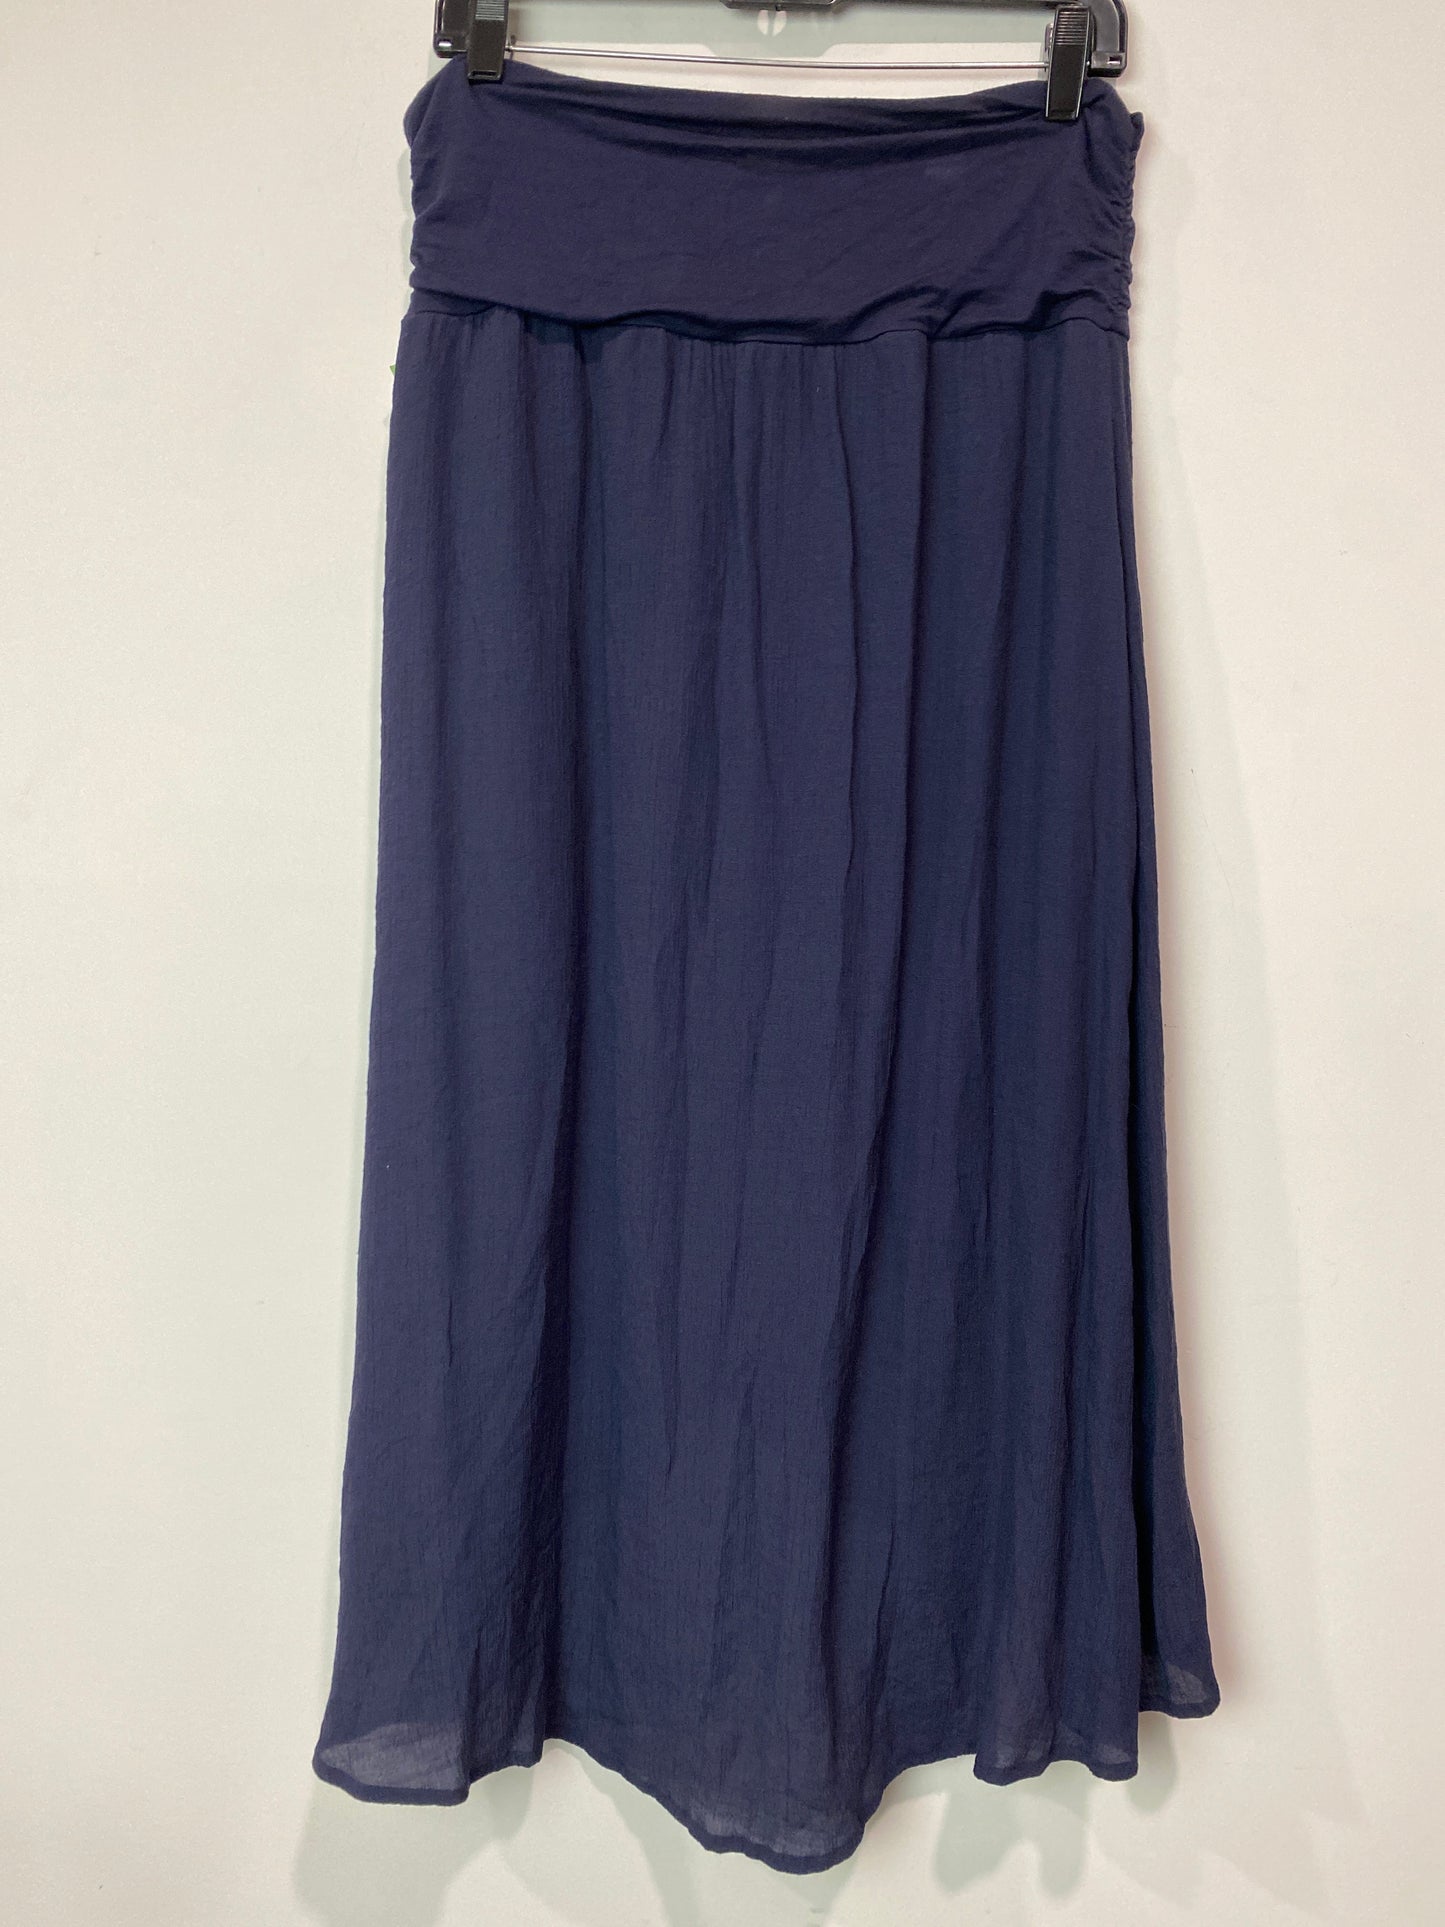 Skirt Midi By Cato  Size: M